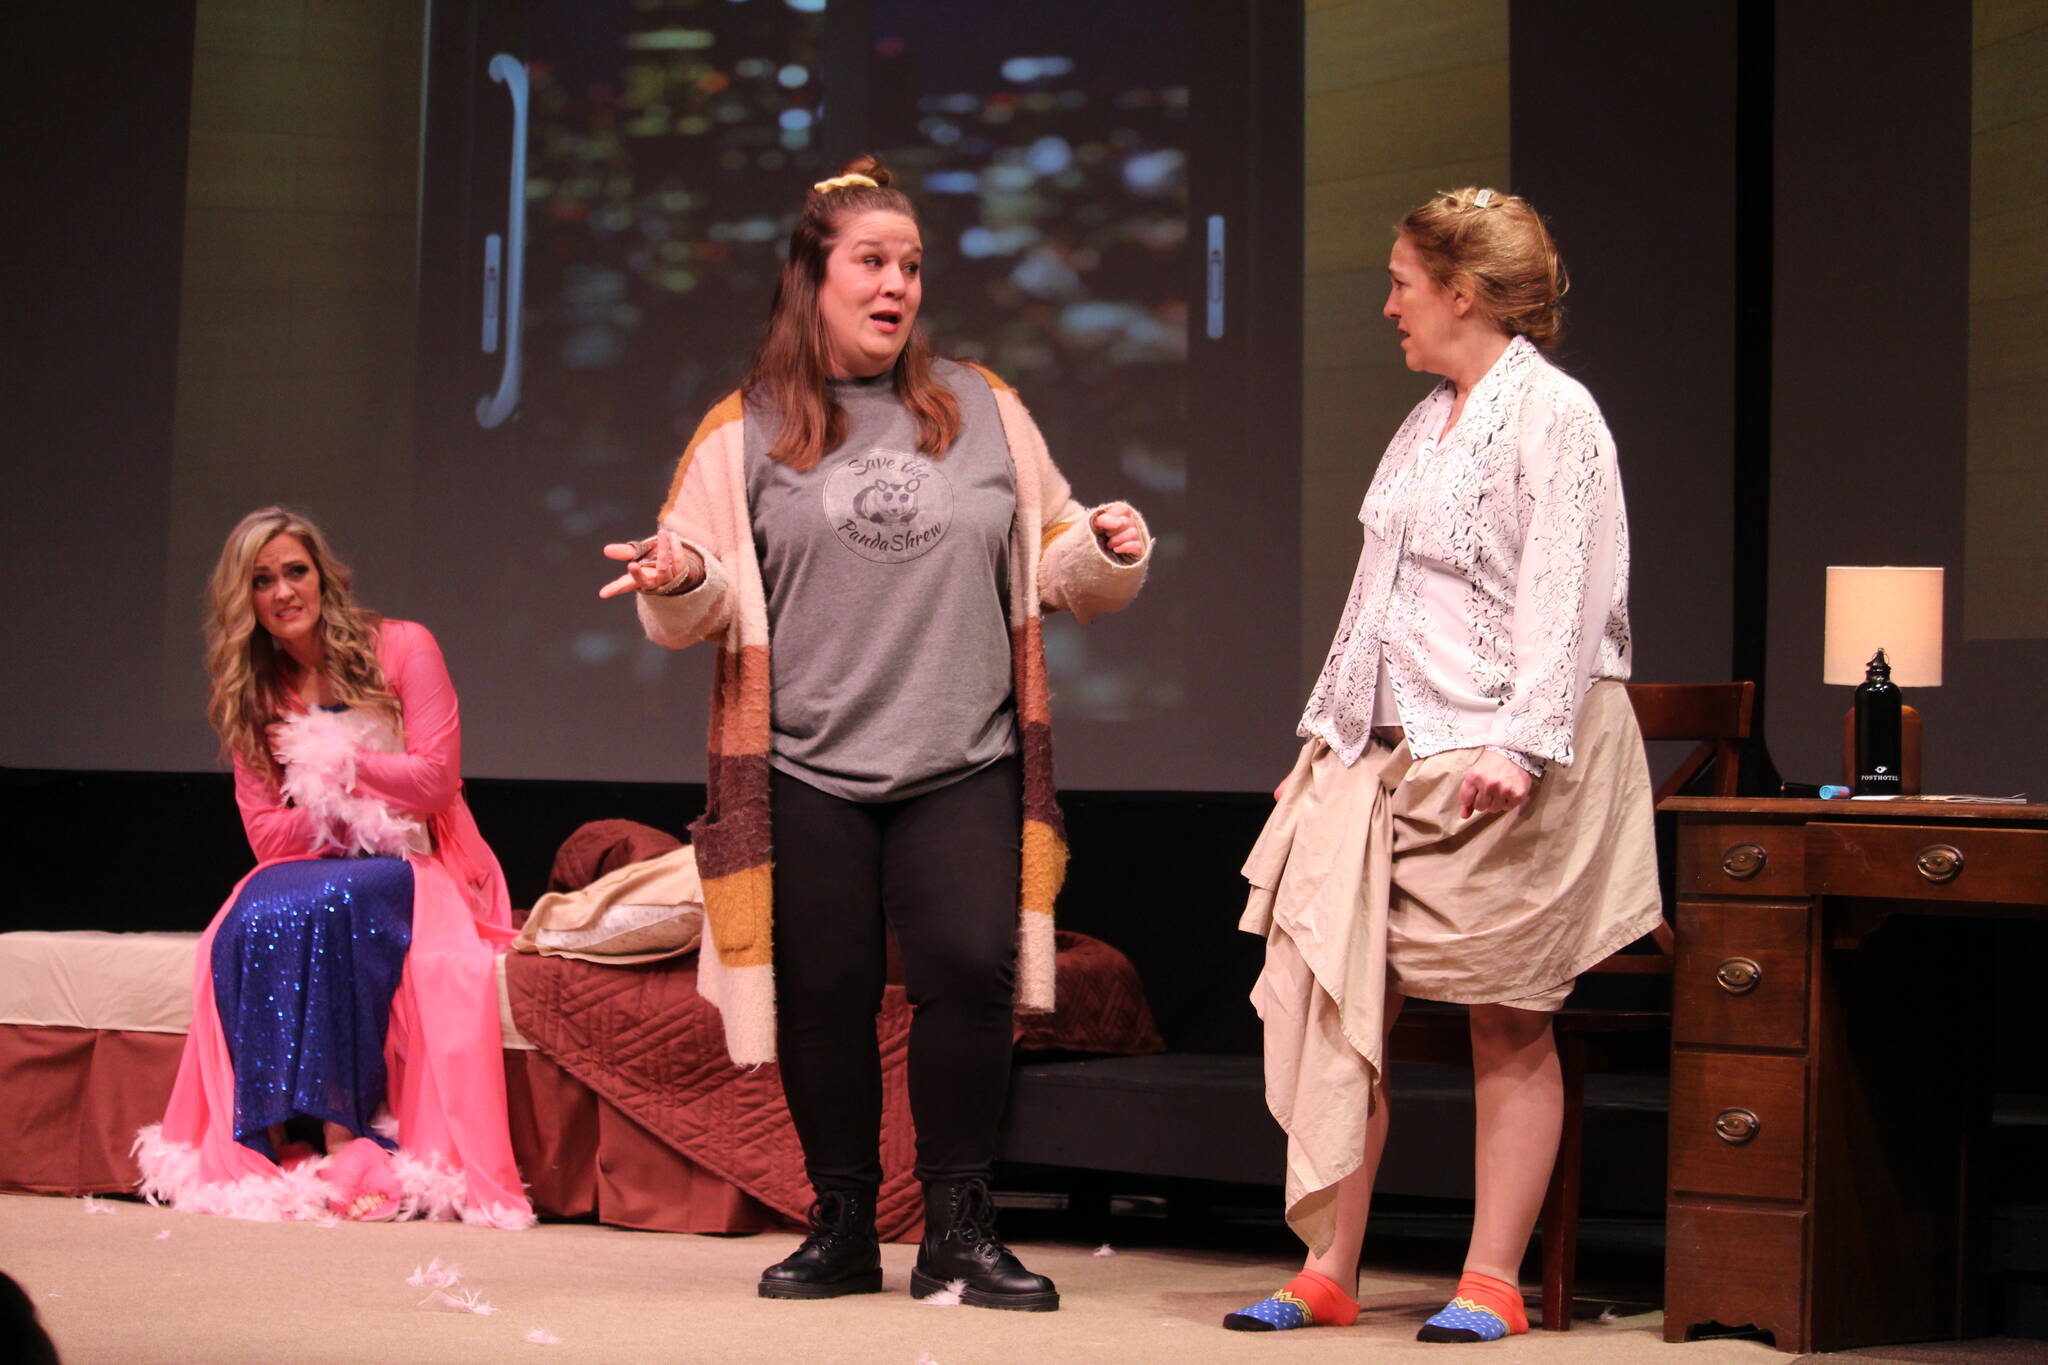 Photo by Karina Andrew/Whidbey News-Times
From left, Abby Thuet, Dianna Gruenwald and Tamra Sipes practice a scene from “The Taming.”